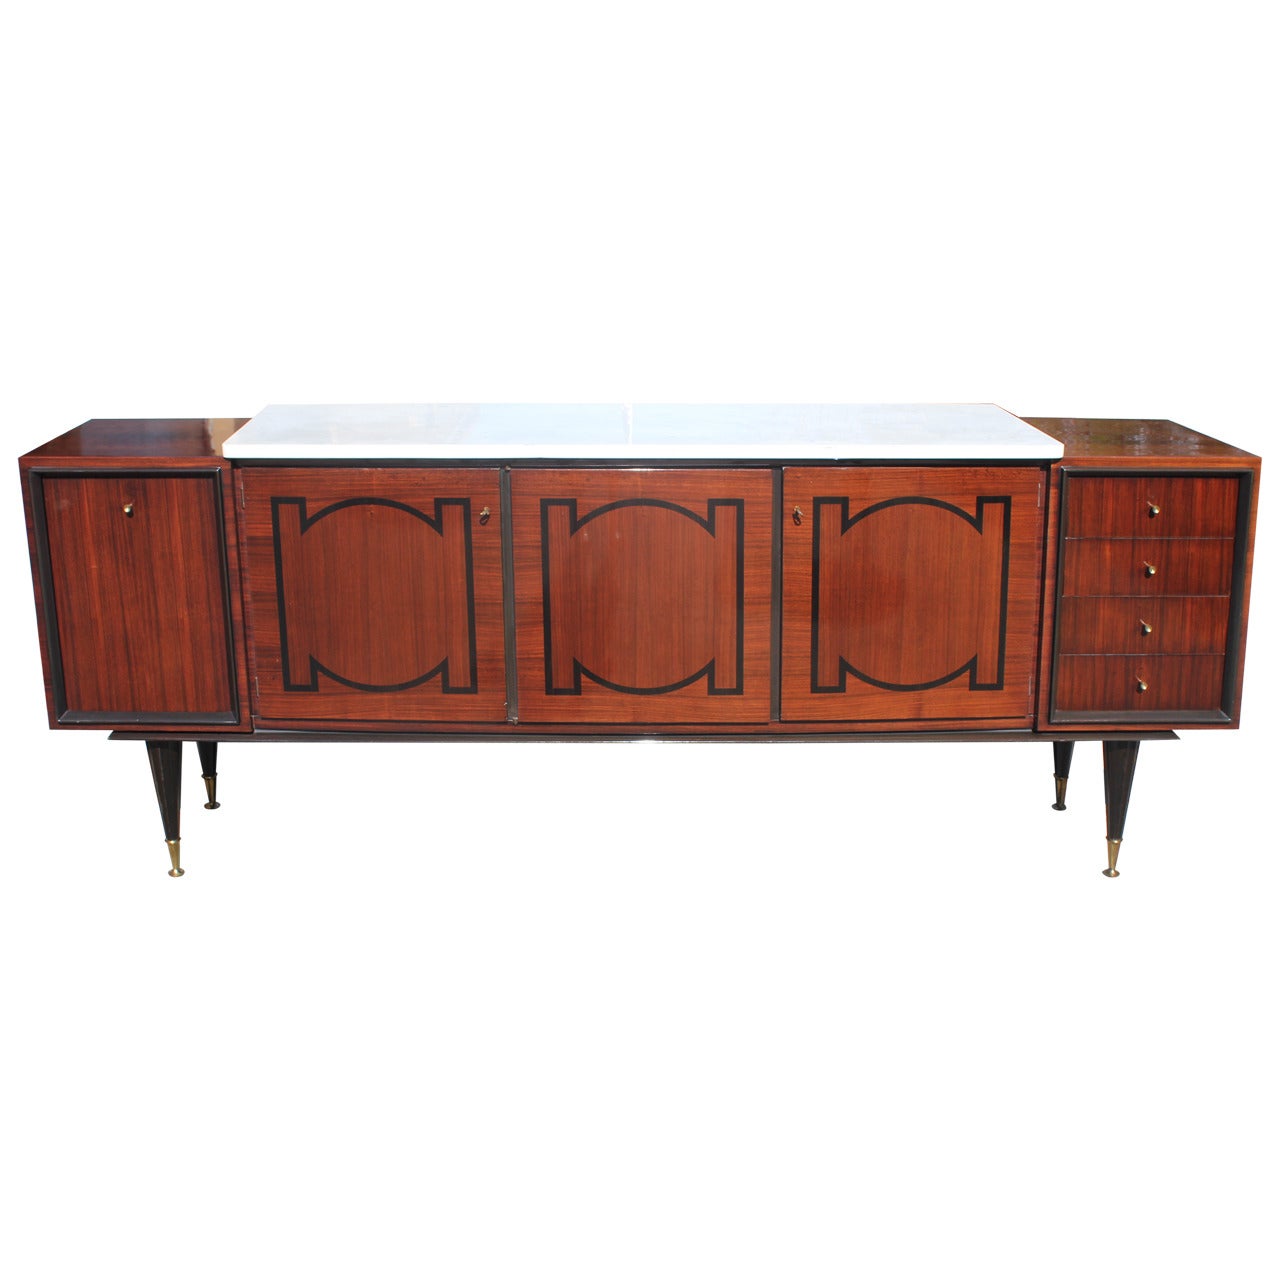 French Art Deco Sideboard or Buffet Palisander with Ebony Inlay, circa 1940